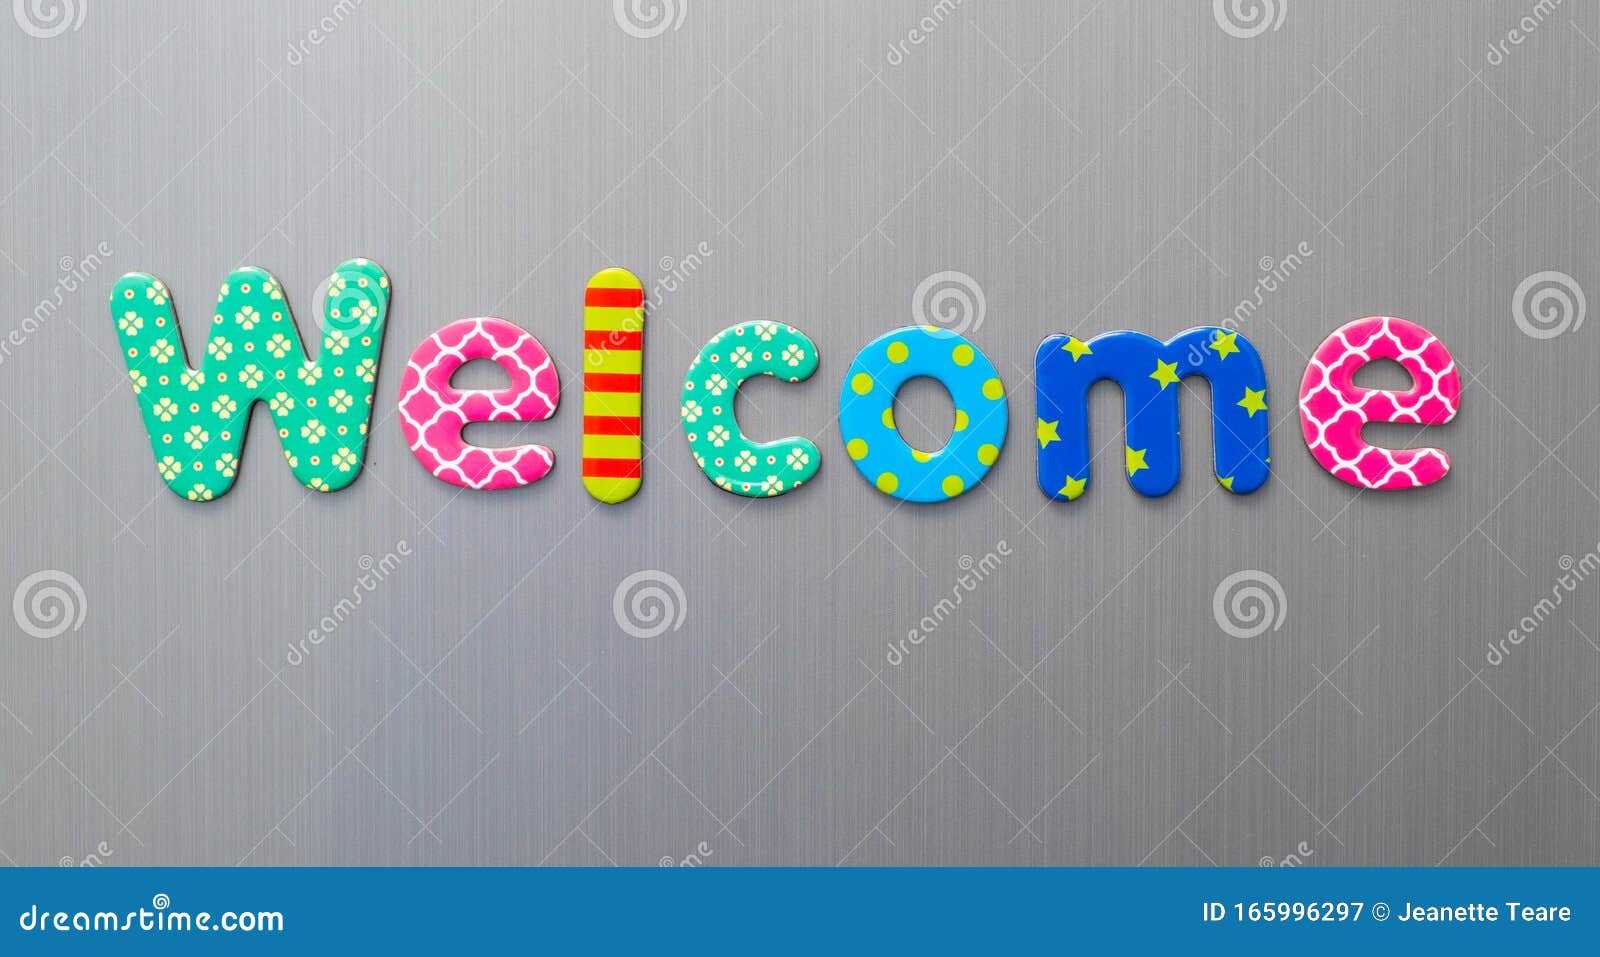 welcome word spelled out in bright colorful patterened letters on brushed metal background